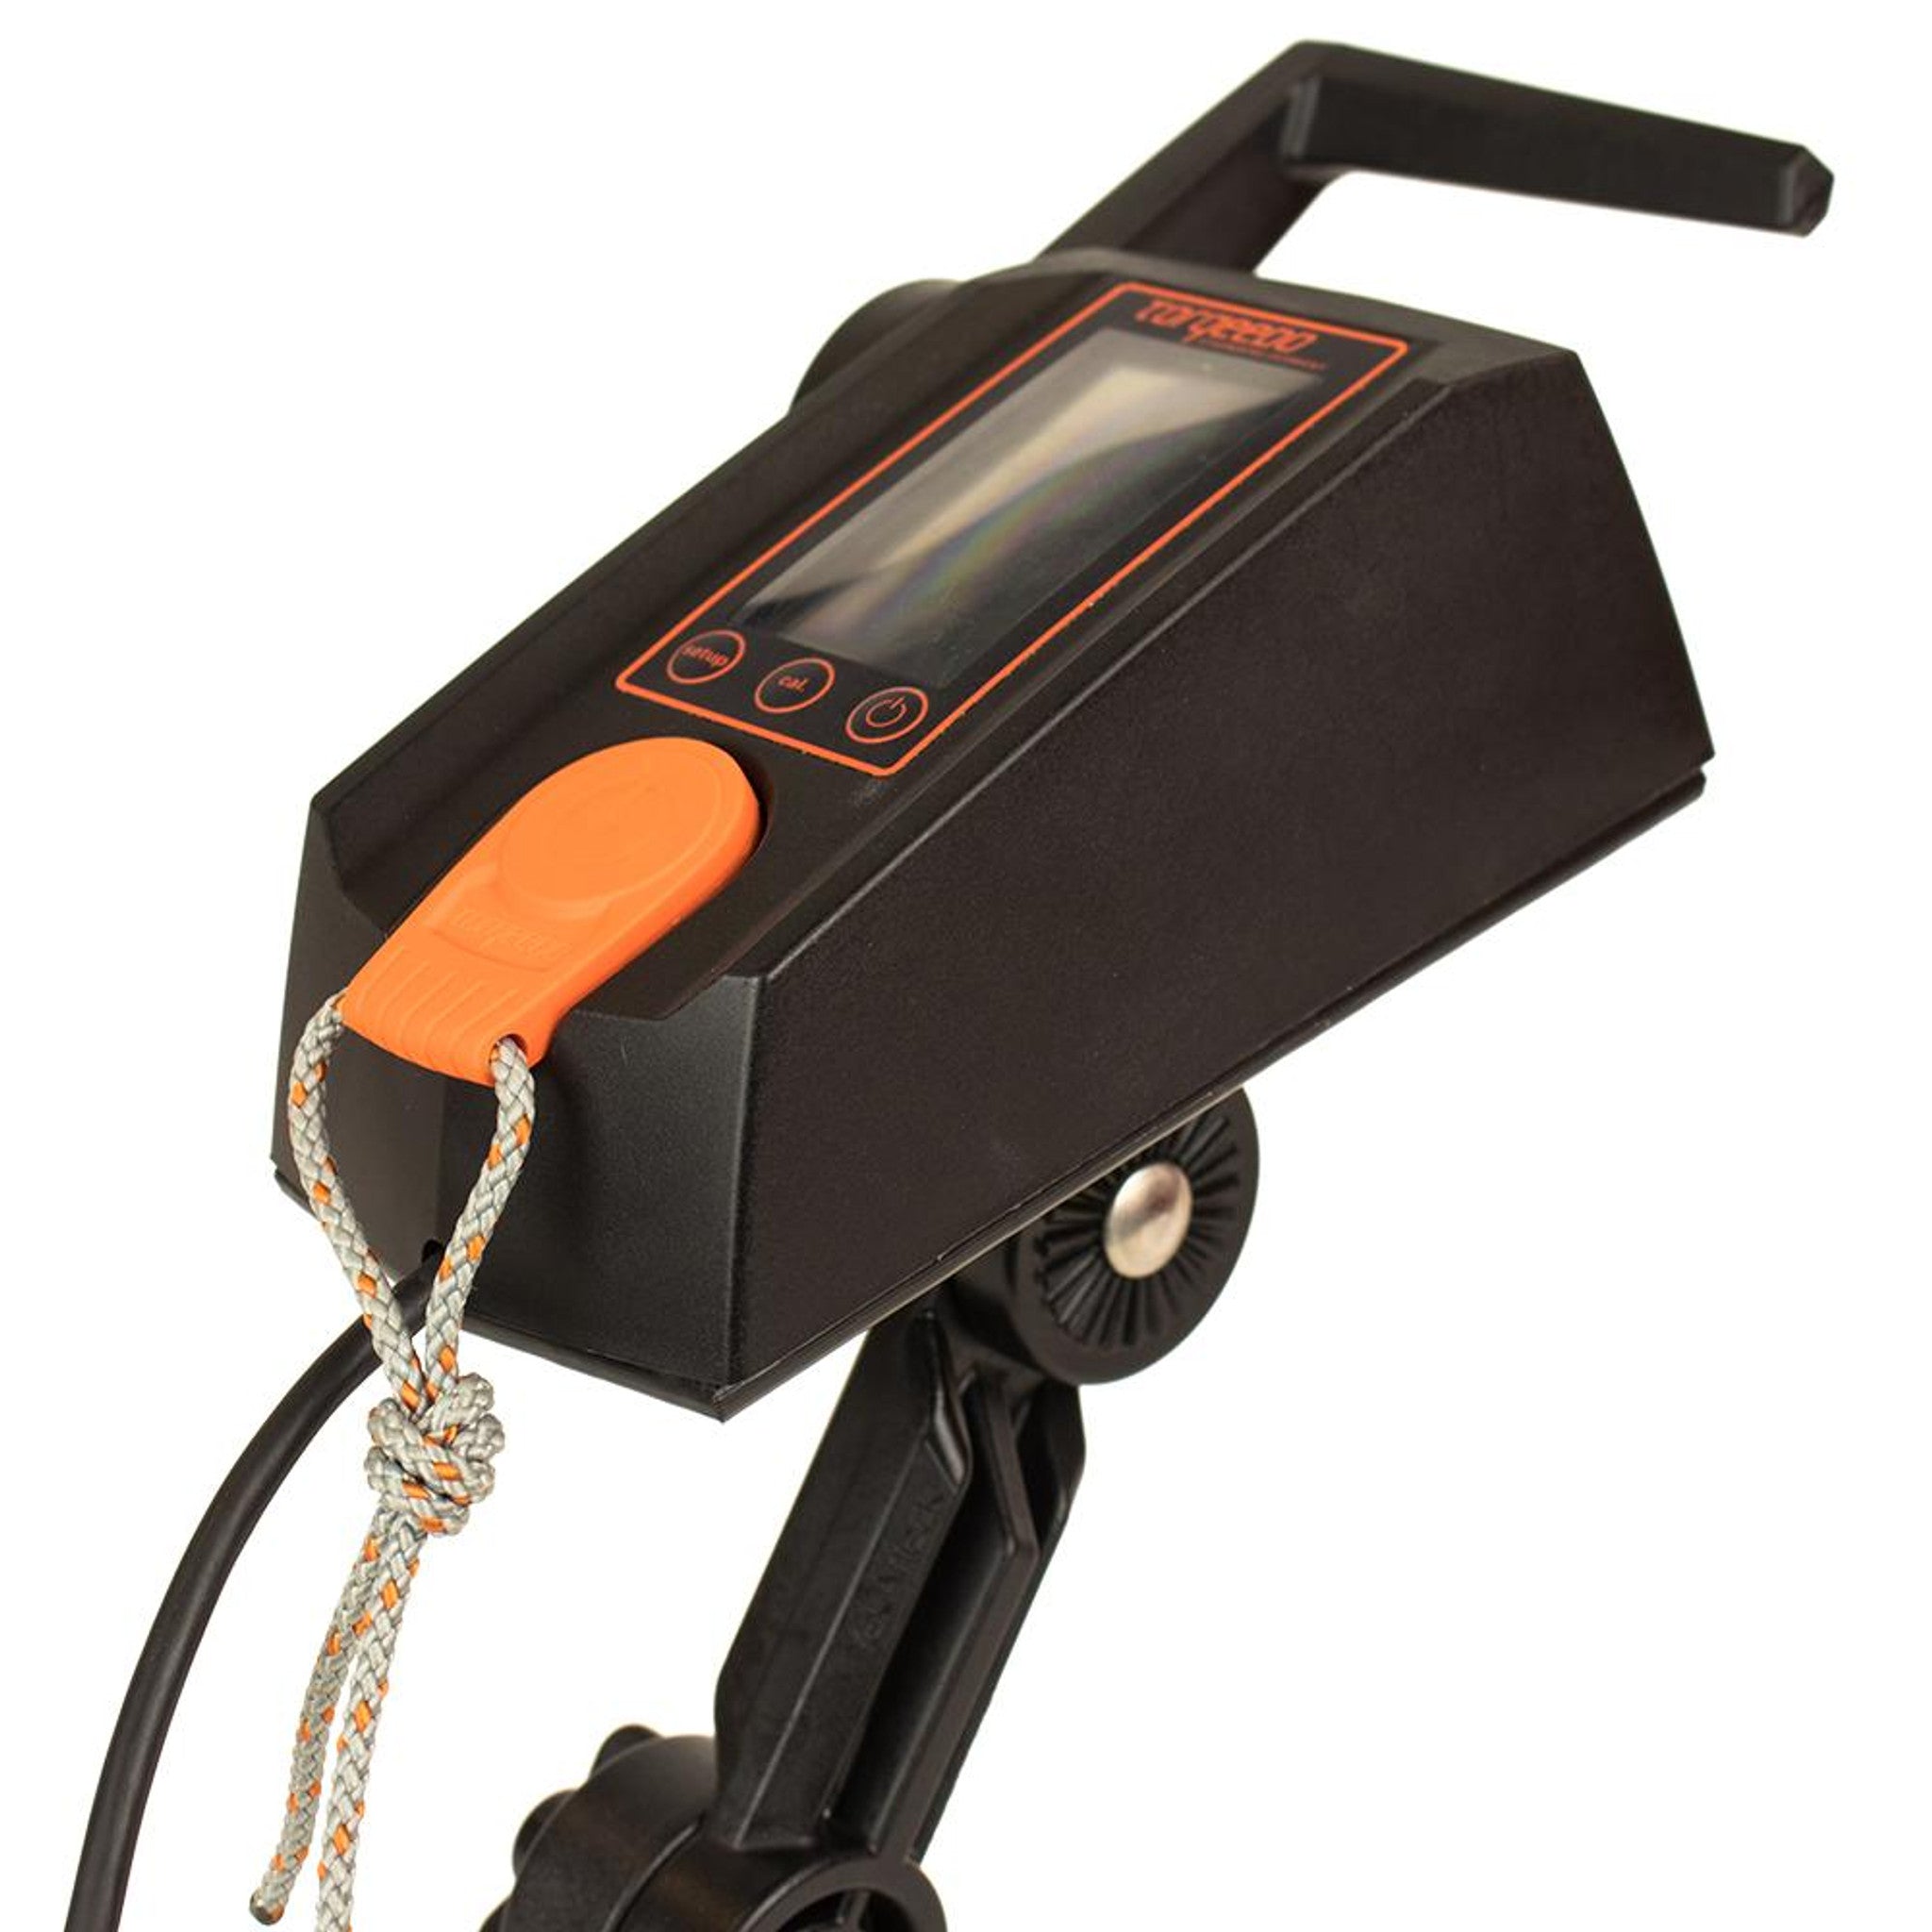 Torqeedo Throttle Mount with Track Mounted LockNLoad™ Mounting System